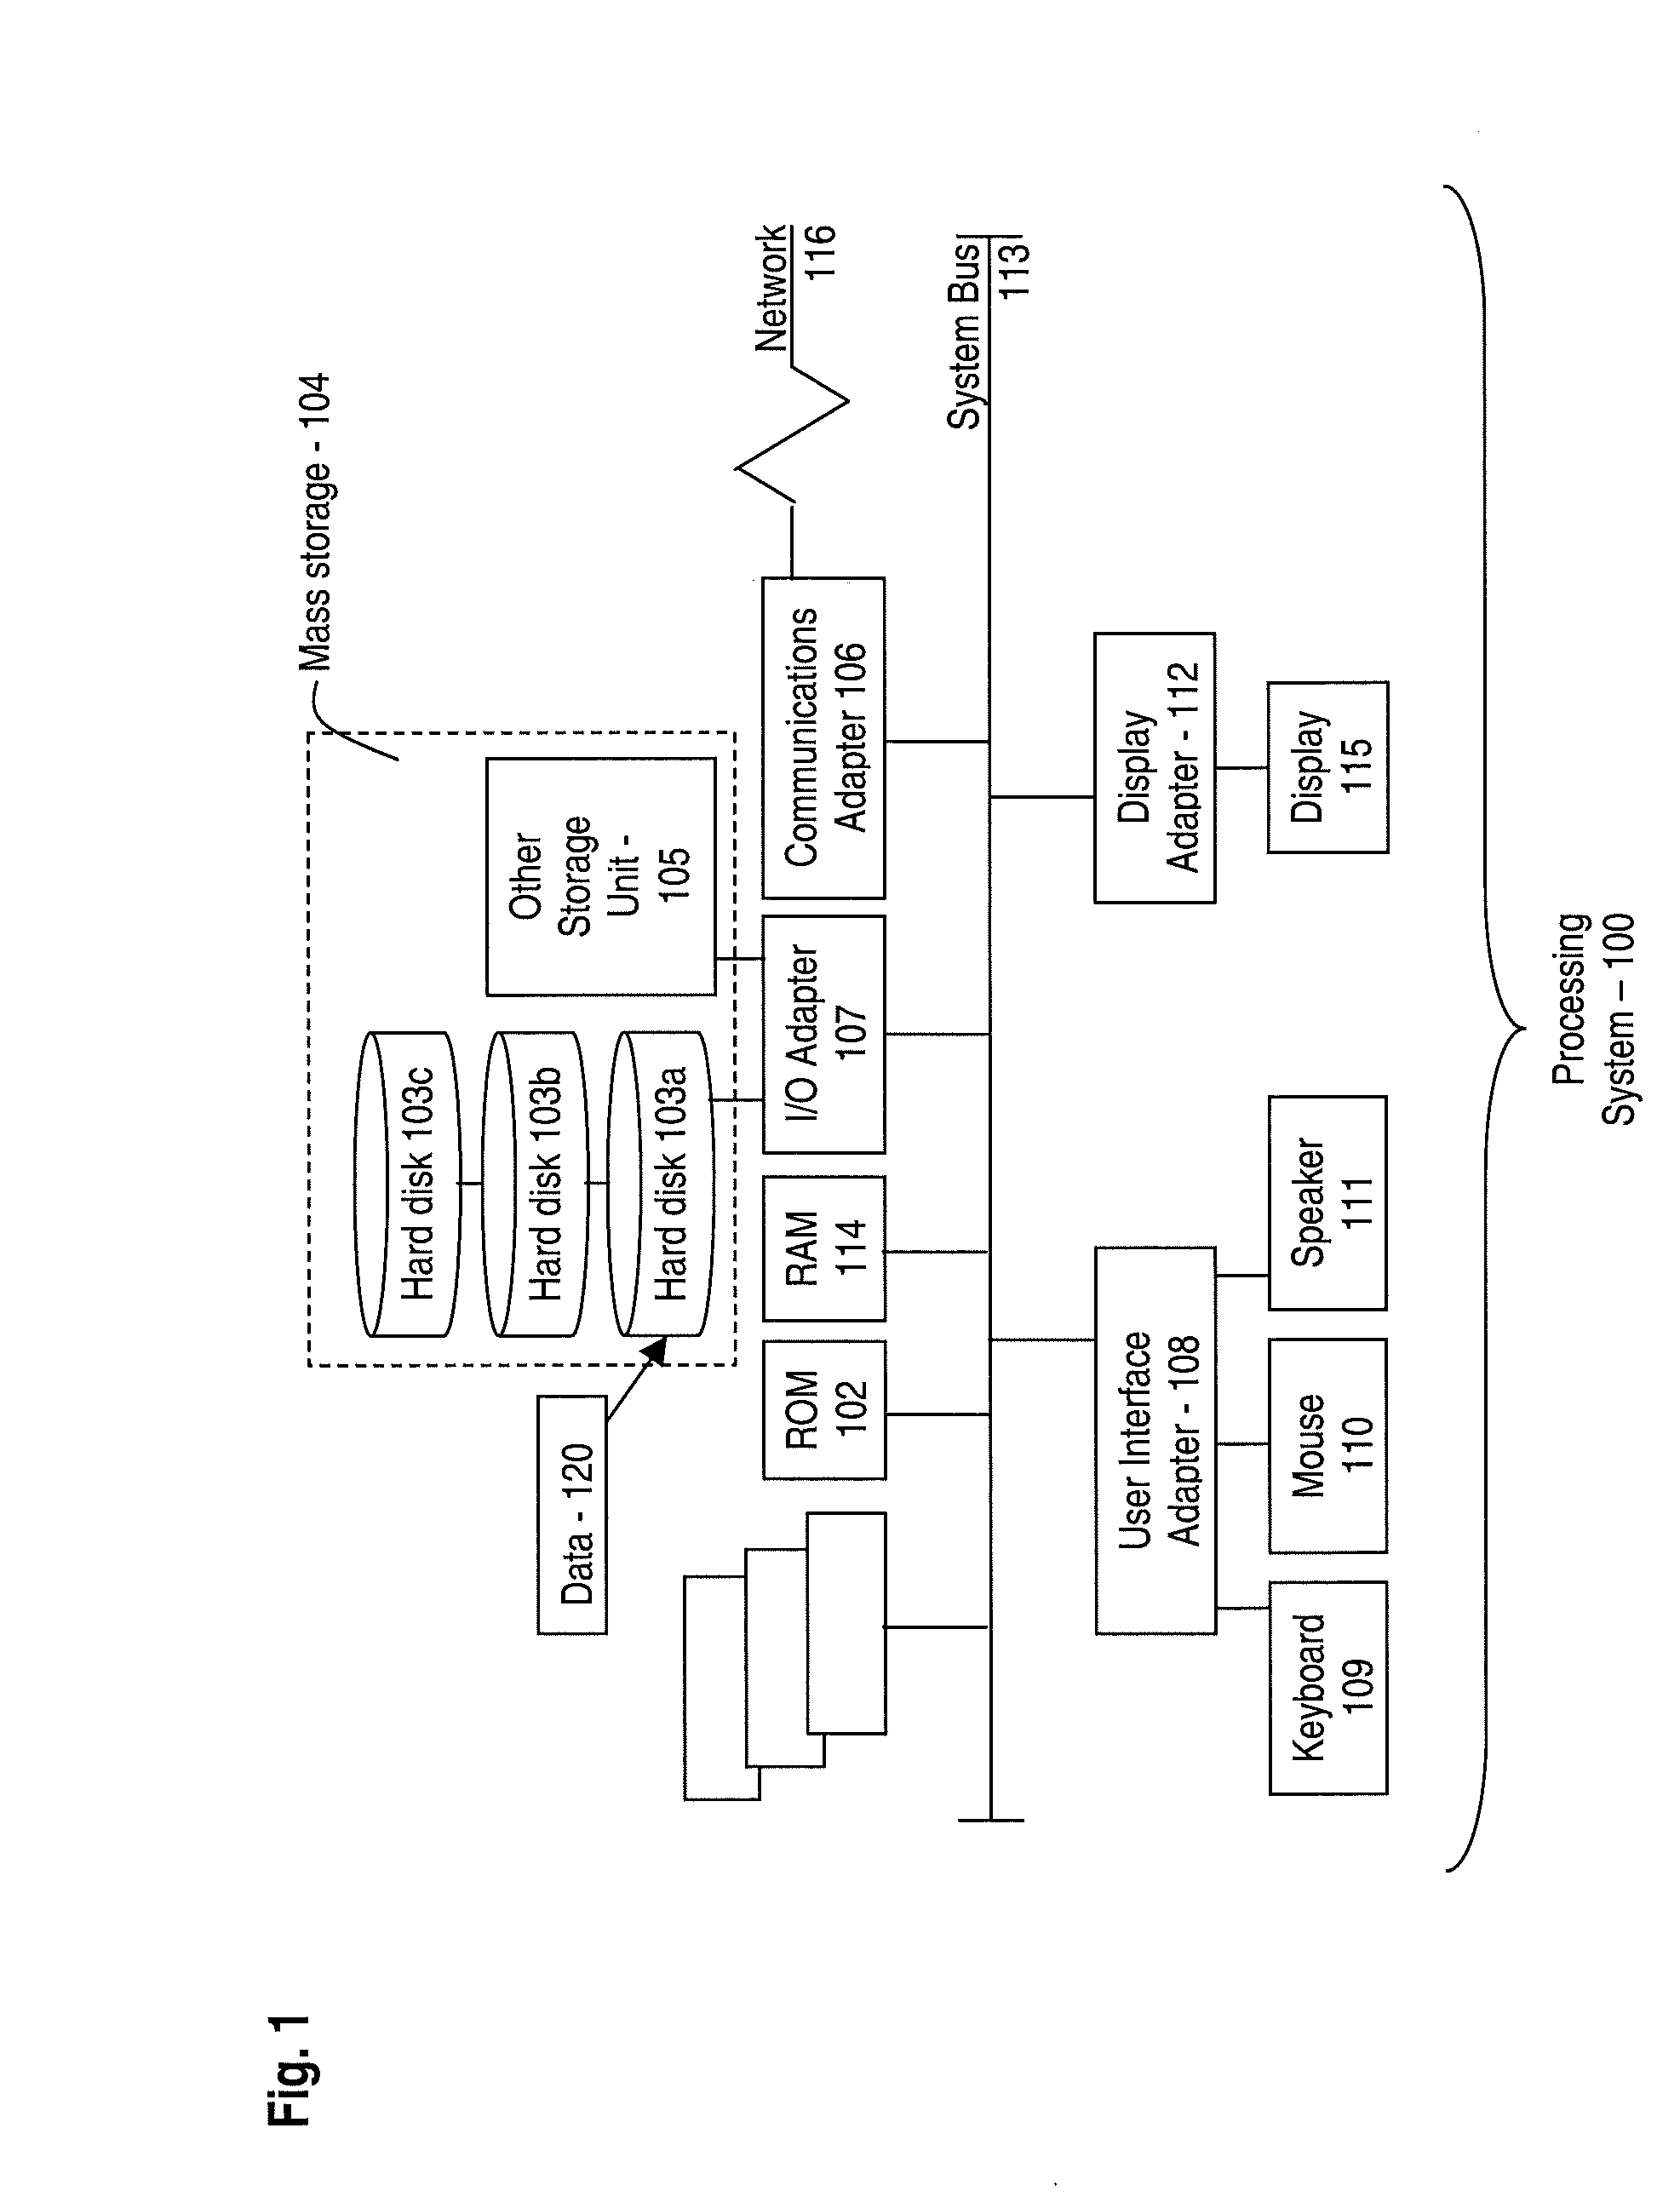 Enhancement of data mirroring to provide parallel processing of overlapping writes